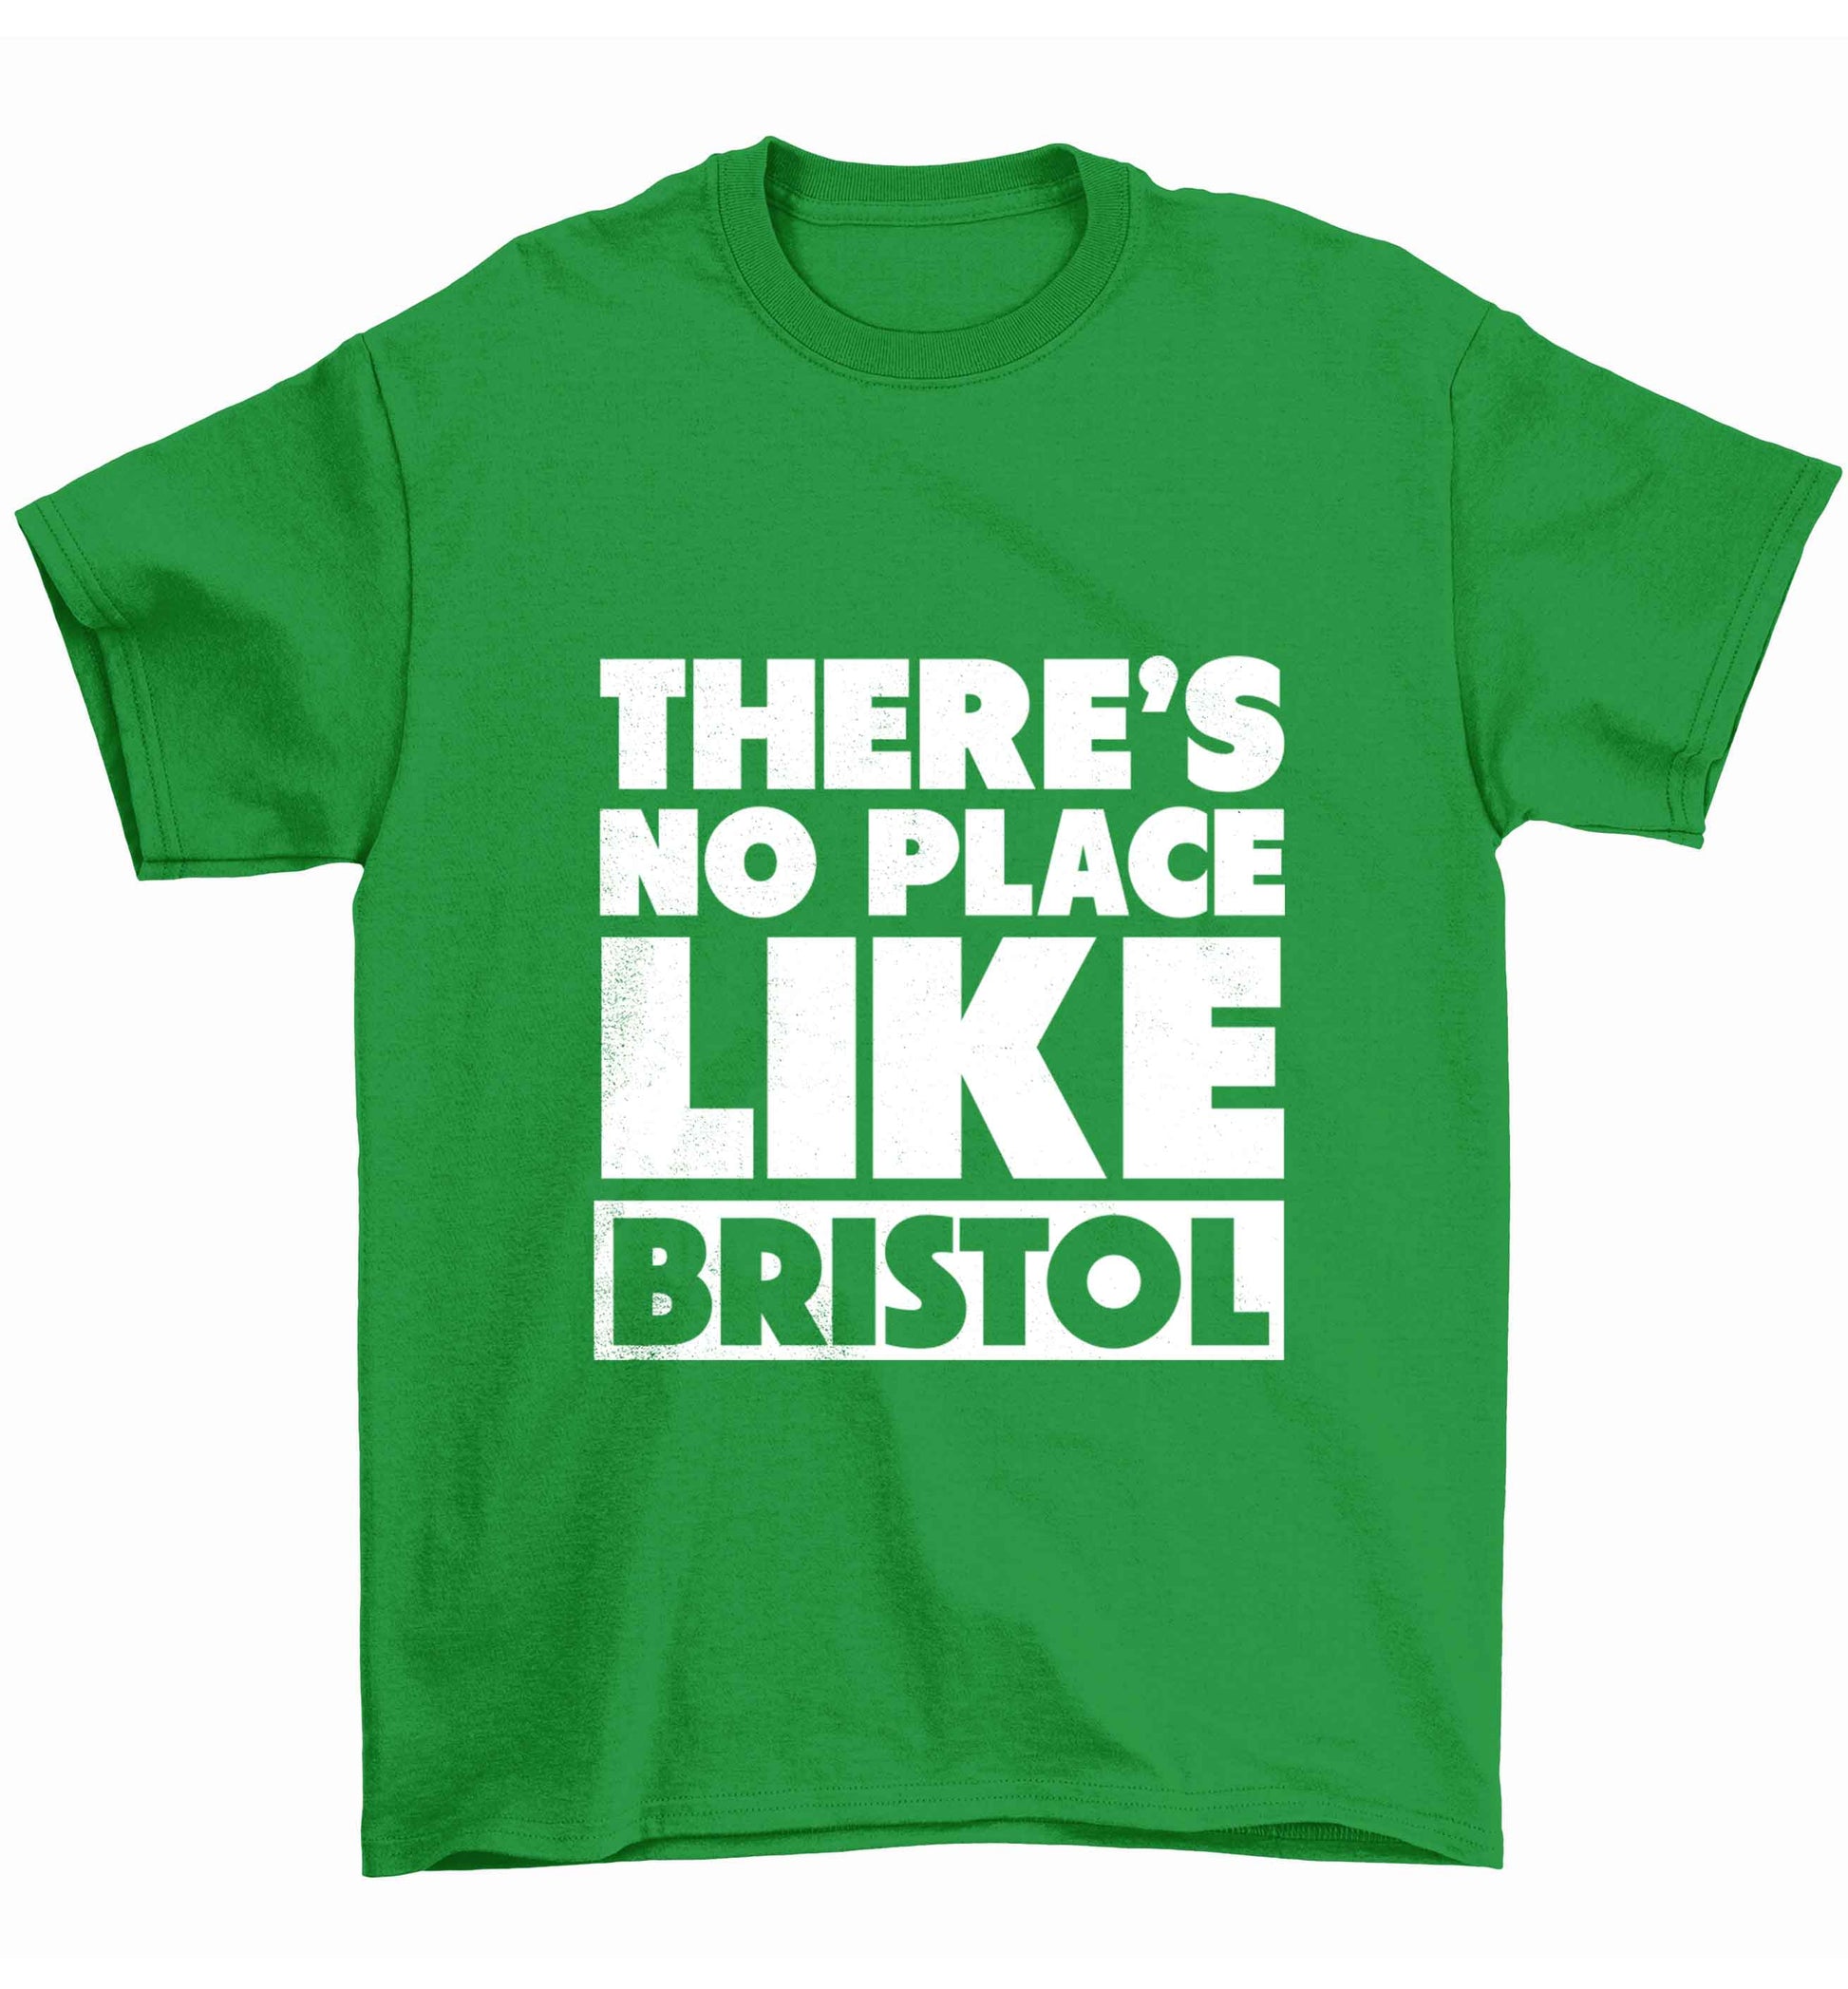 There's no place like Bristol Children's green Tshirt 12-13 Years